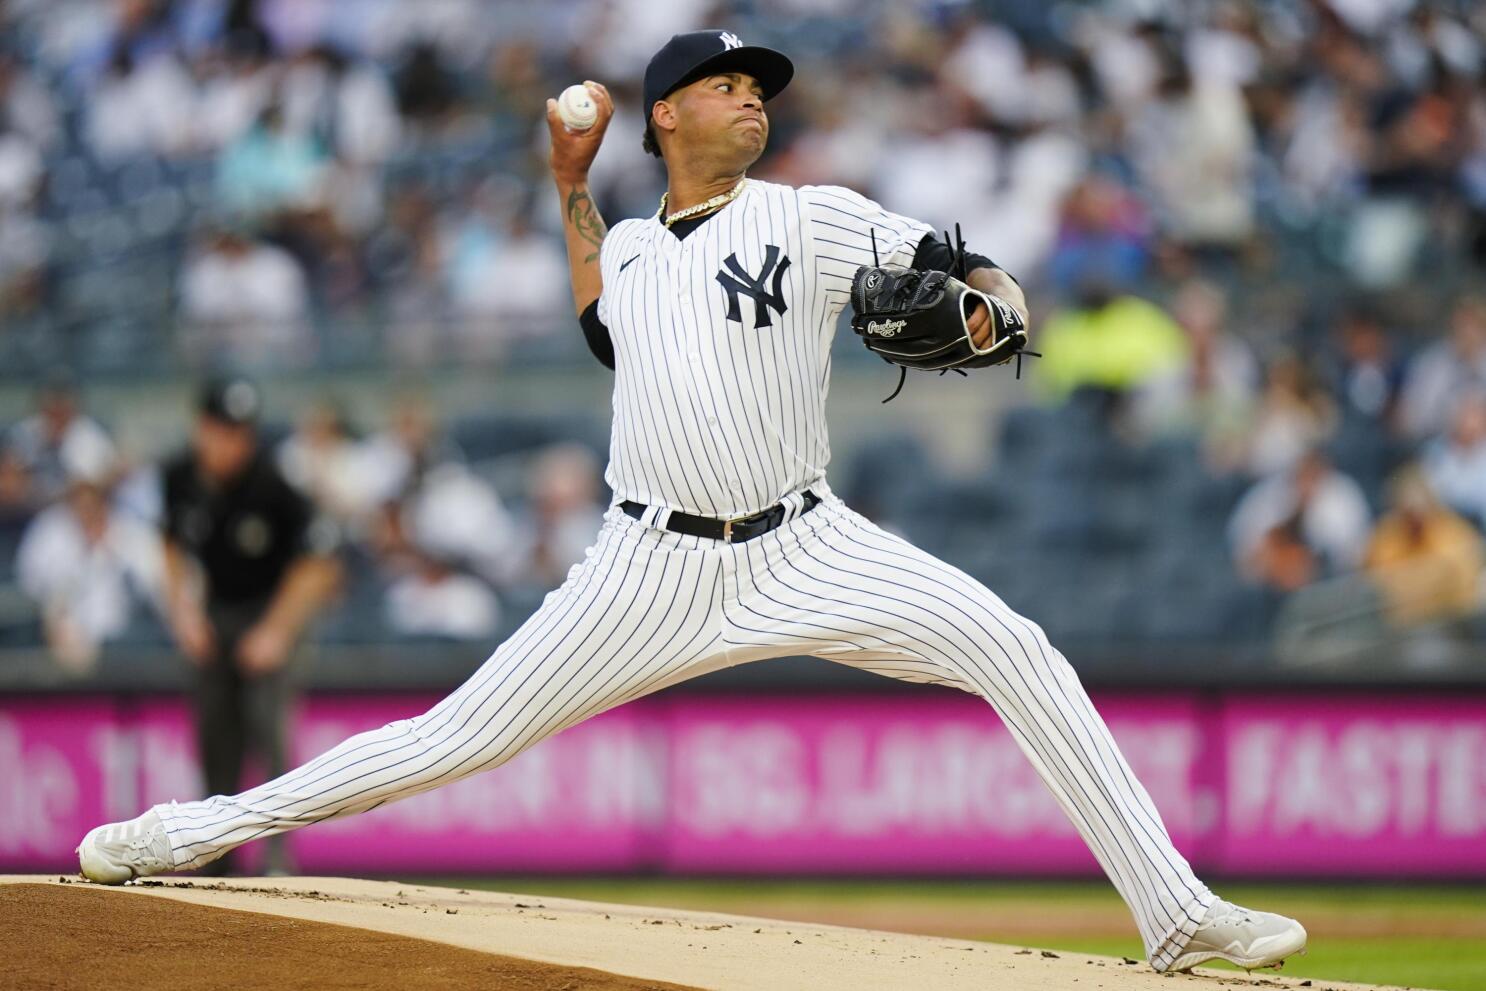 New York Yankees SS Andrew Velazquez to start in Wild Card Game